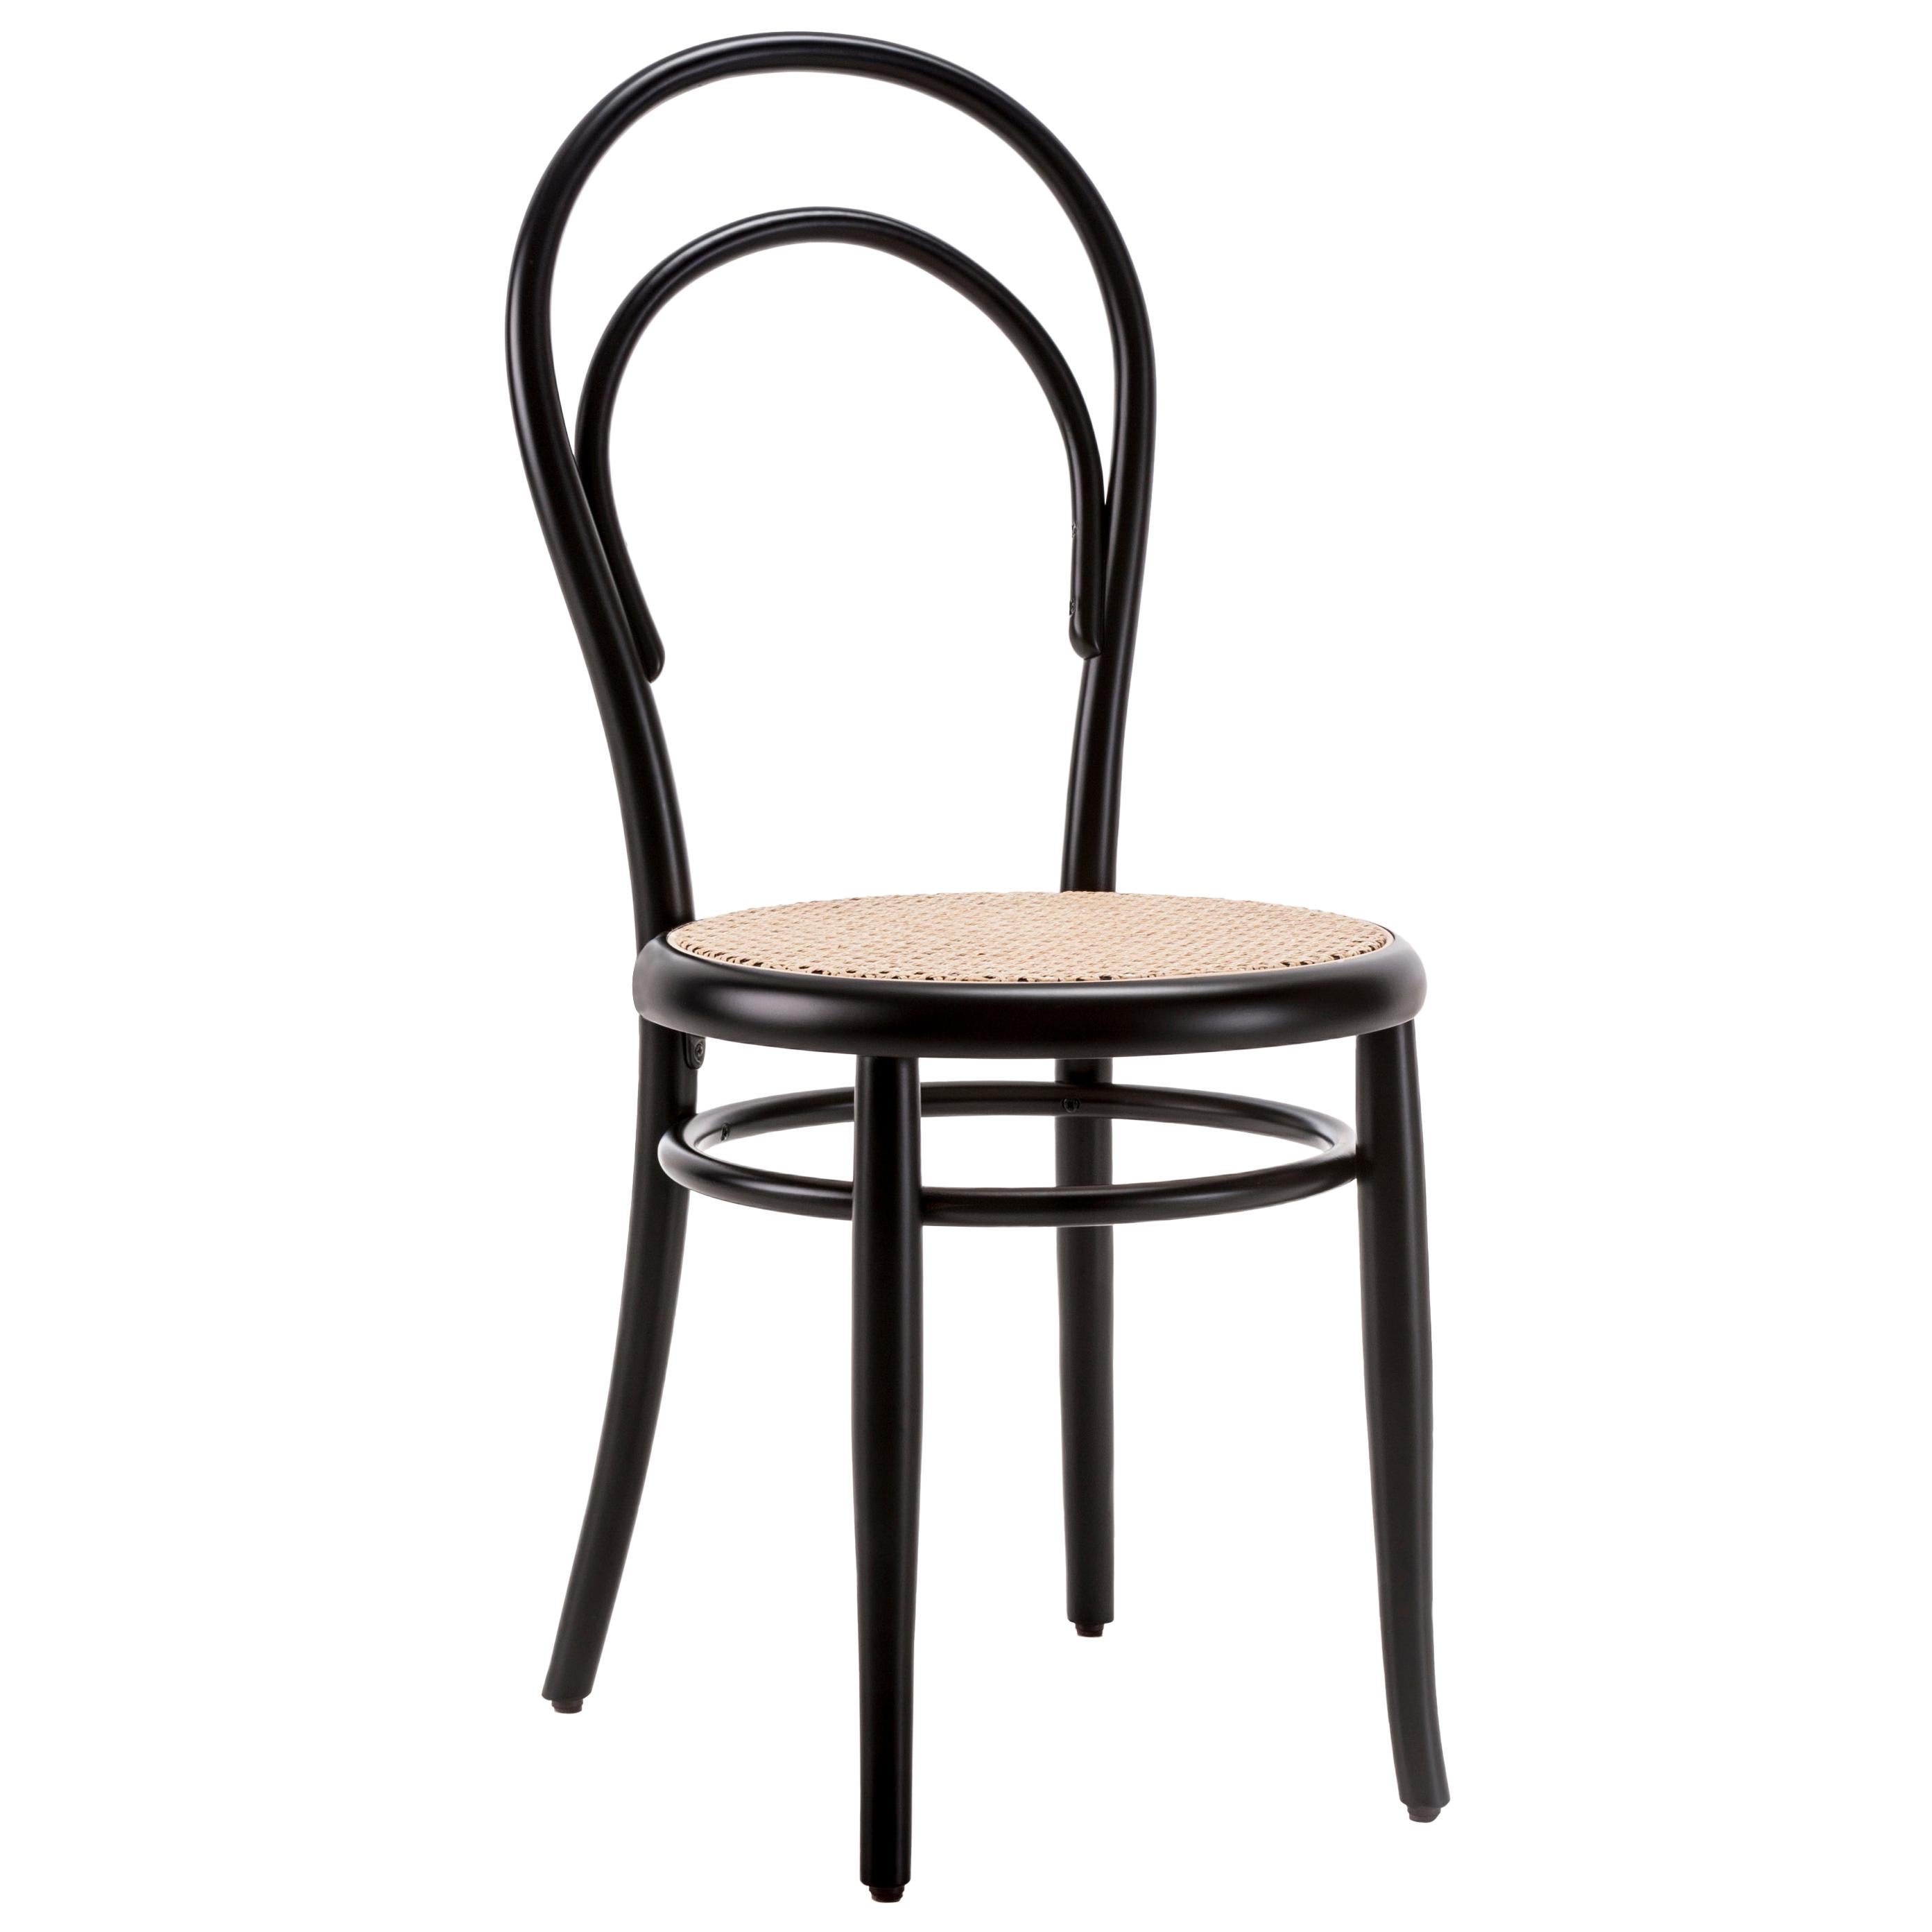 Gebrüder Thonet Vienna GmbH N.14 Chair in Black with Woven Cane Seat For Sale